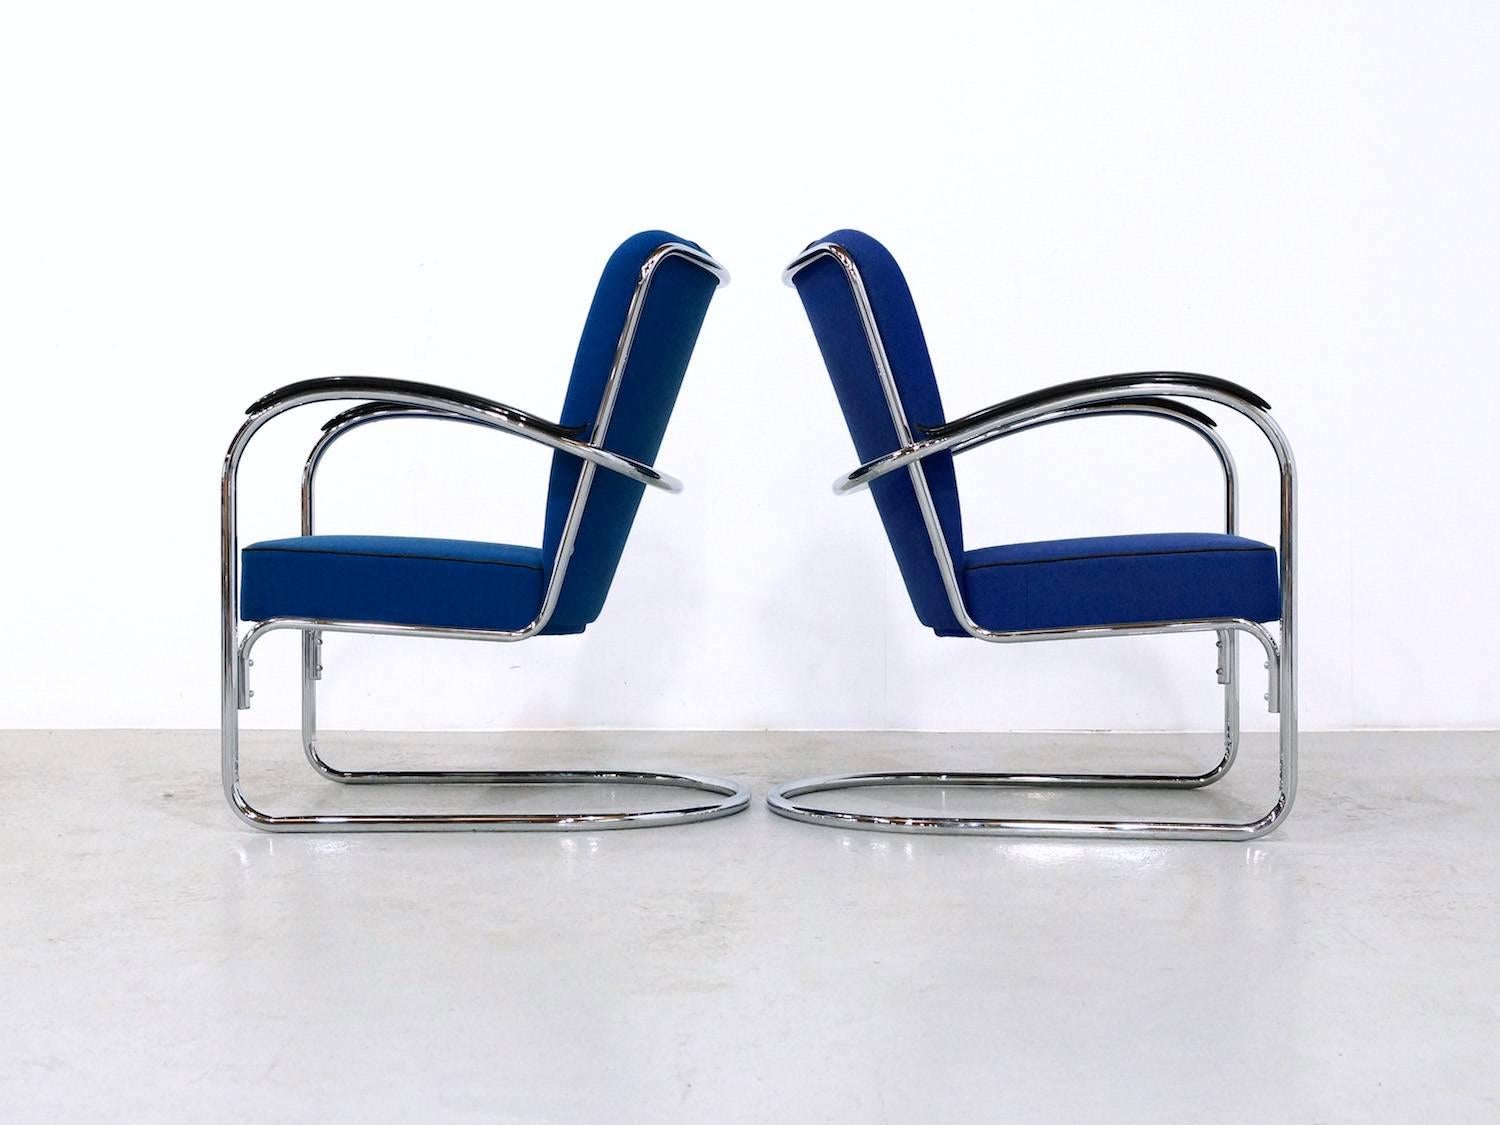 Set of two Gispen 412 easy chairs designed in 1934 by W.H. Gispen. The Gispen 412 is the most famous chair in the collection.
The Gispen 412 chair is a sprung armchair equipped with a two-part manually curved chromed steel tube frame and